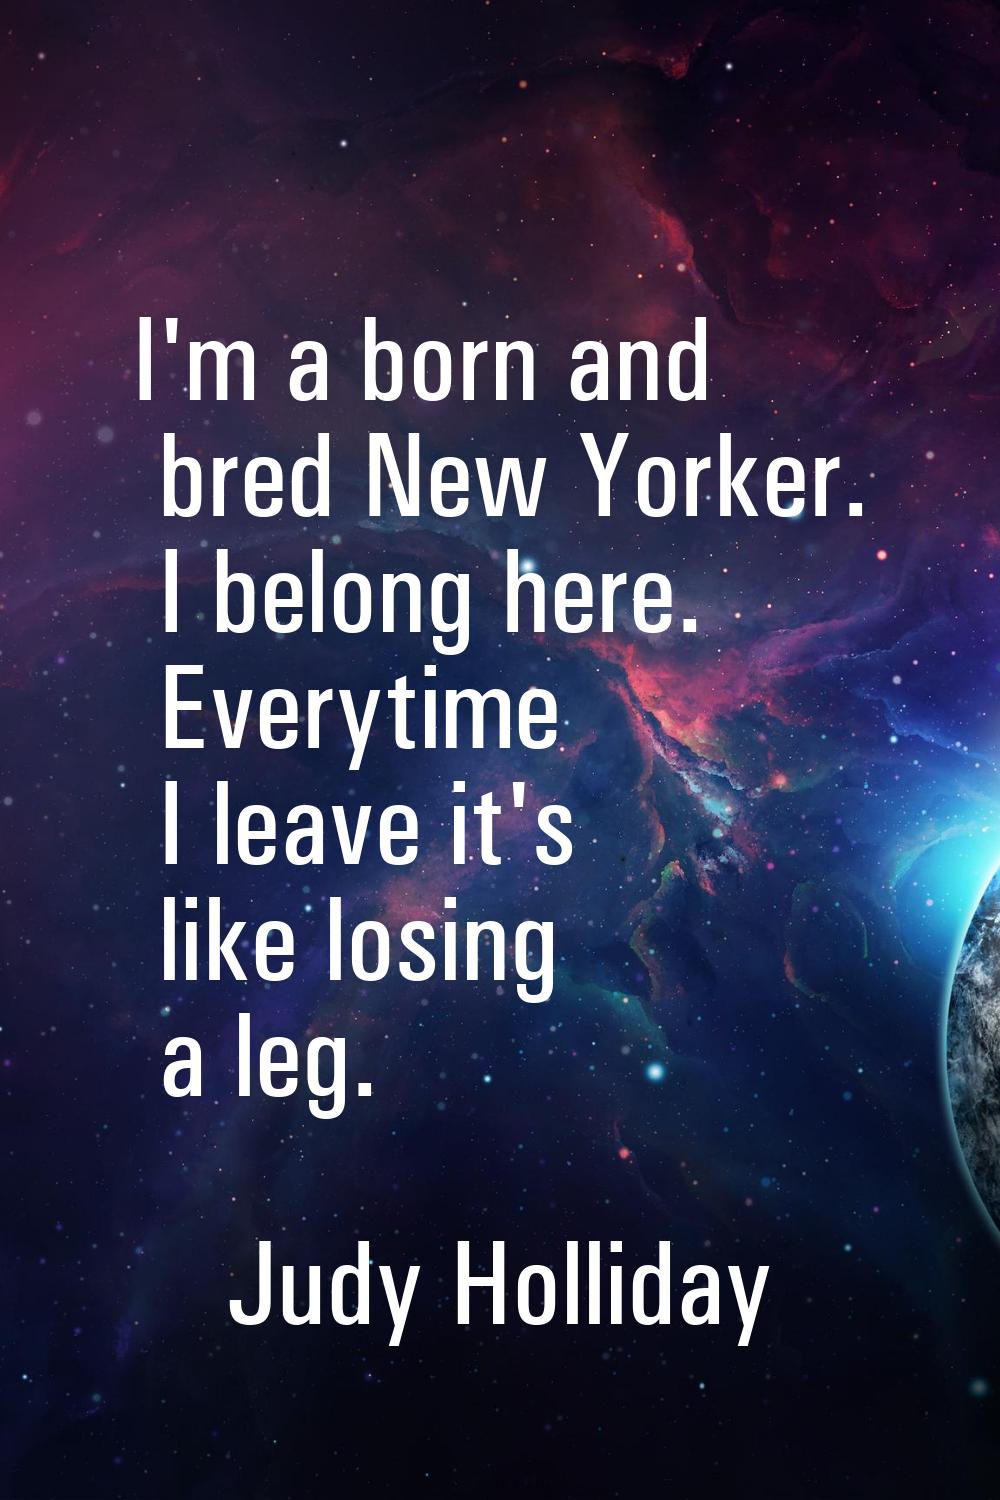 I'm a born and bred New Yorker. I belong here. Everytime I leave it's like losing a leg.